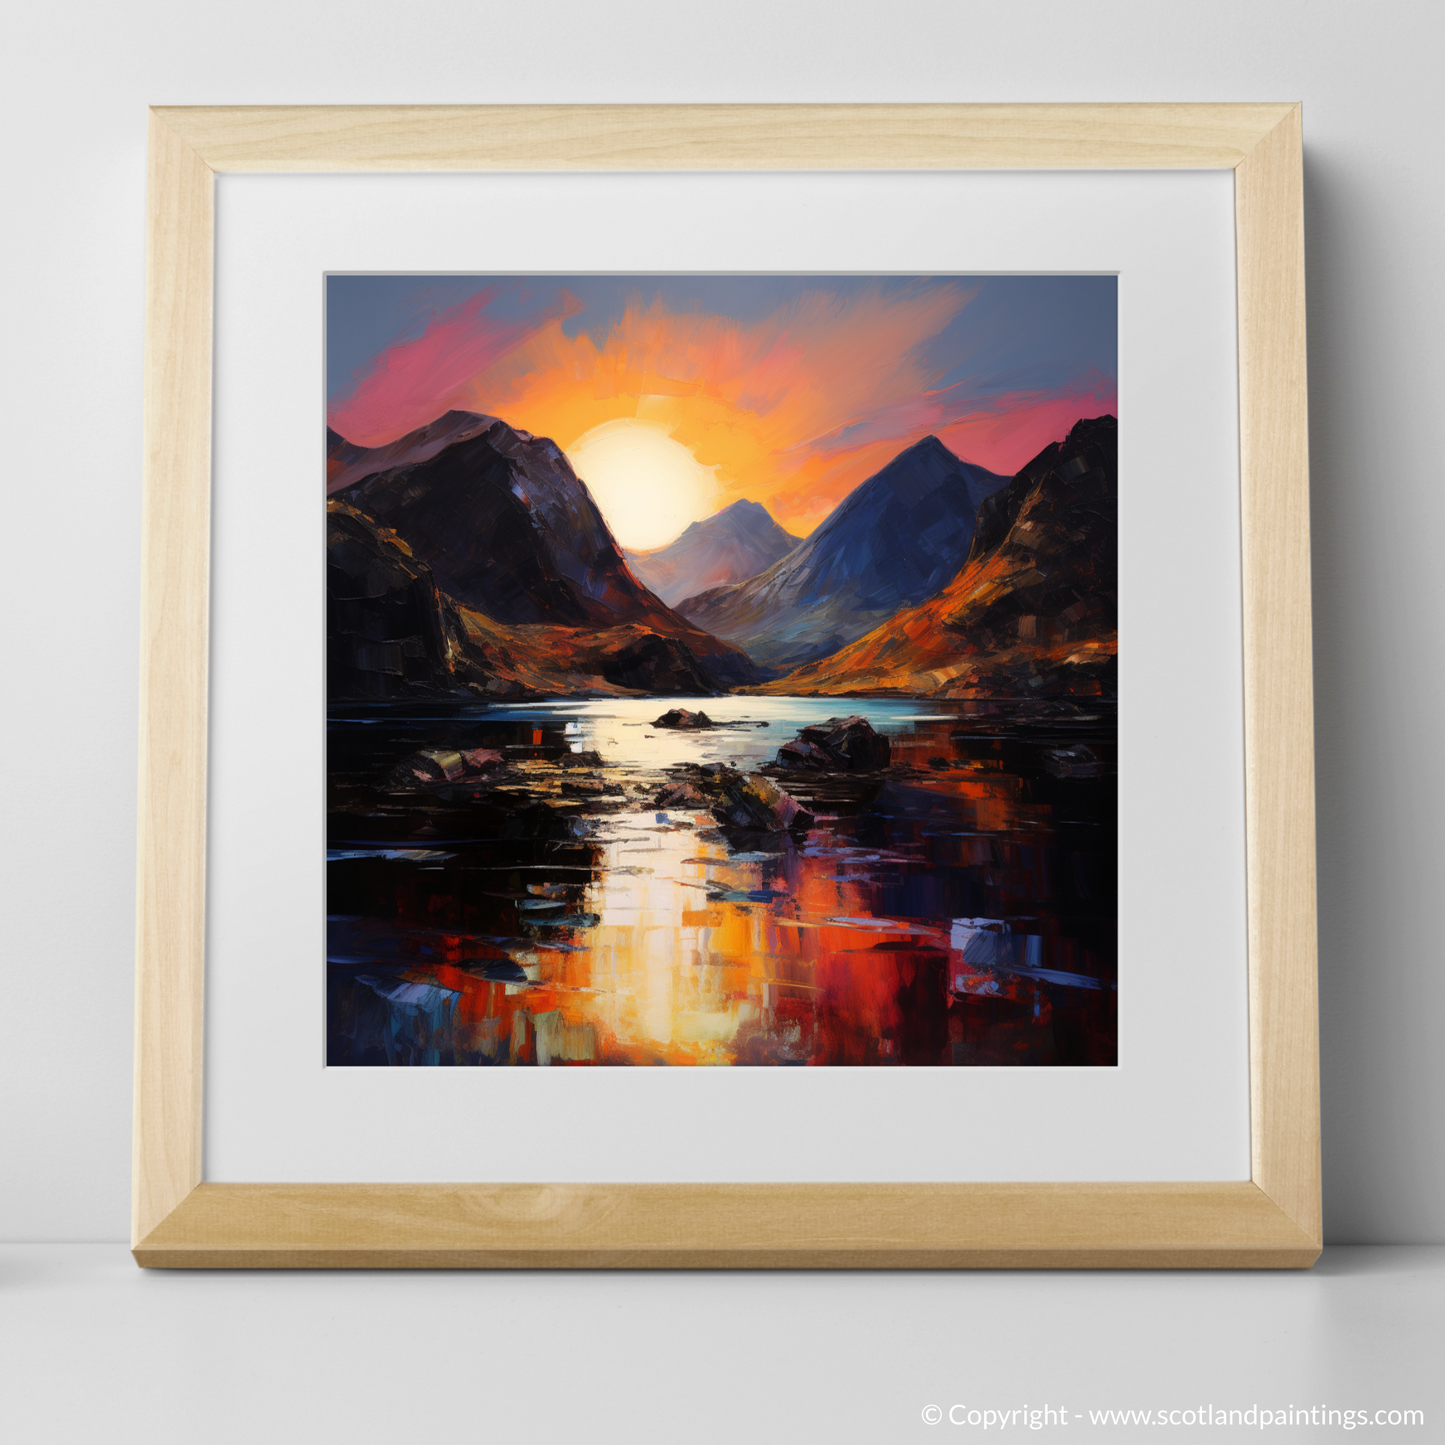 Art Print of Loch Coruisk at sunset with a natural frame